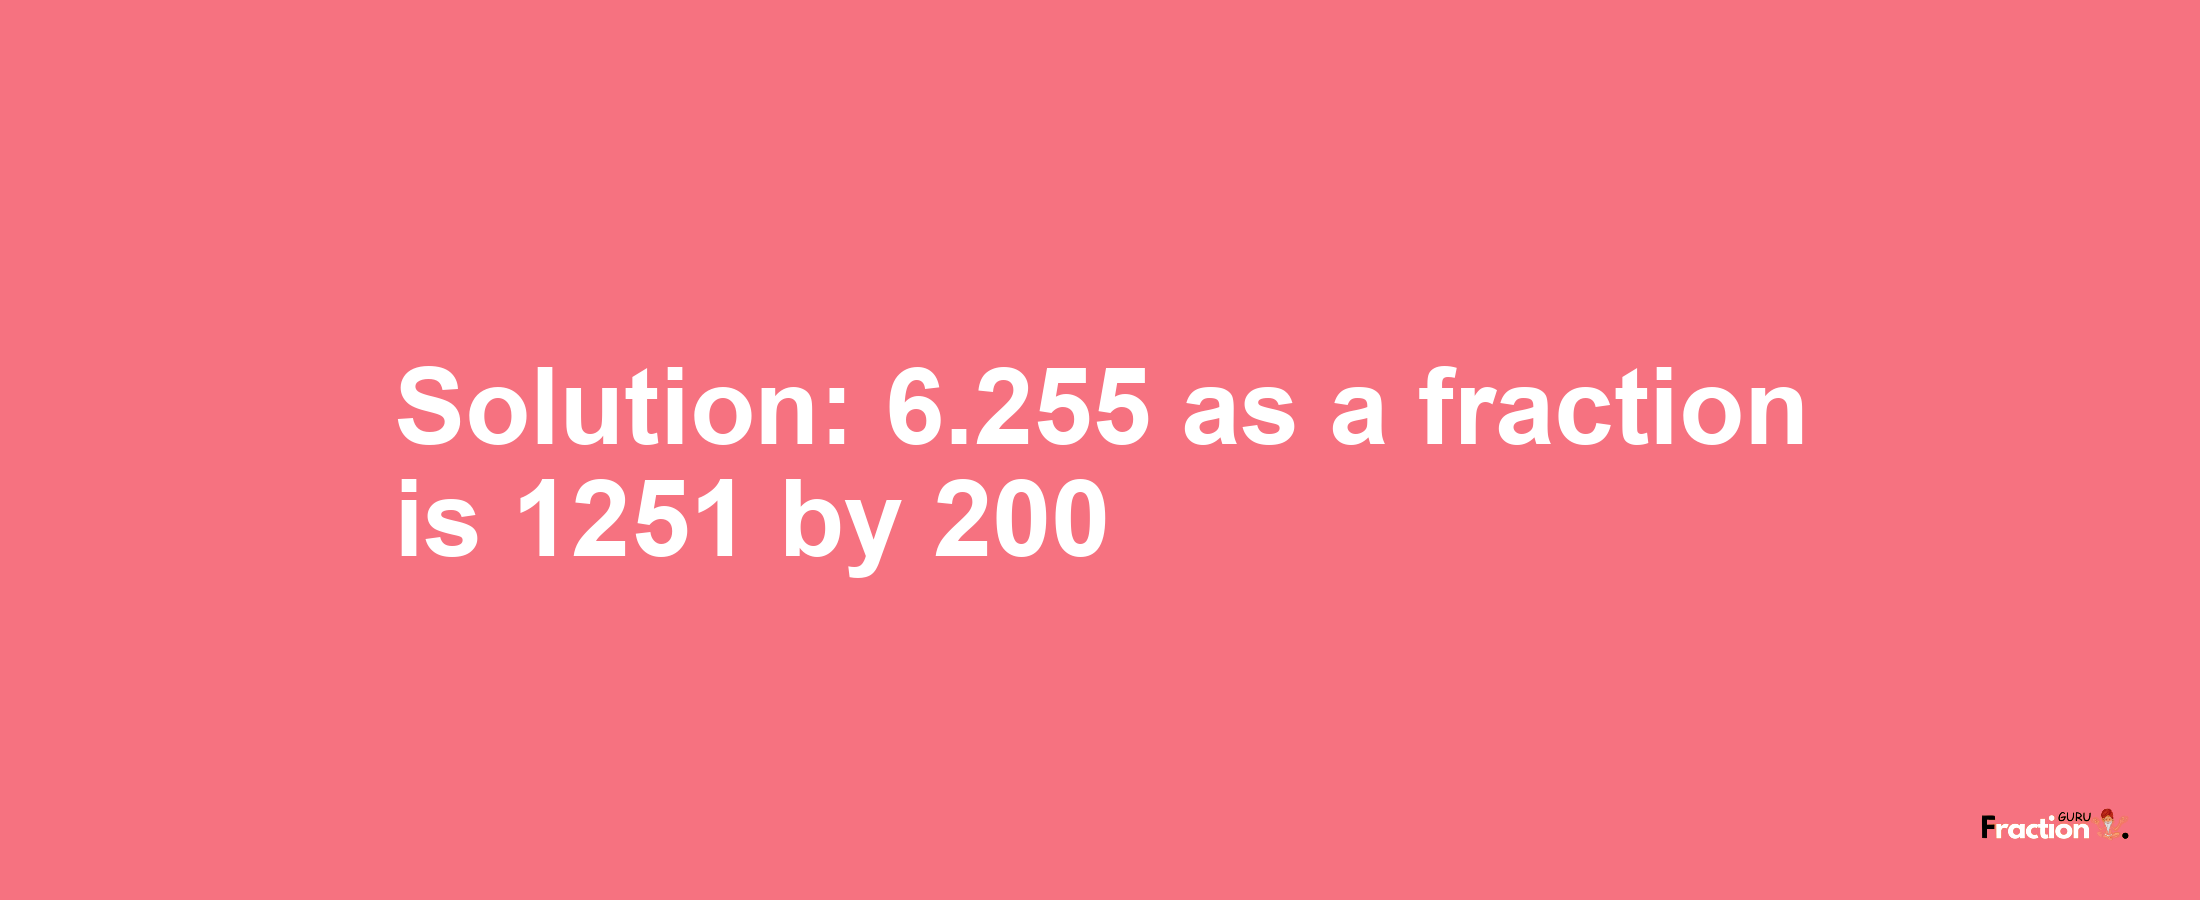 Solution:6.255 as a fraction is 1251/200